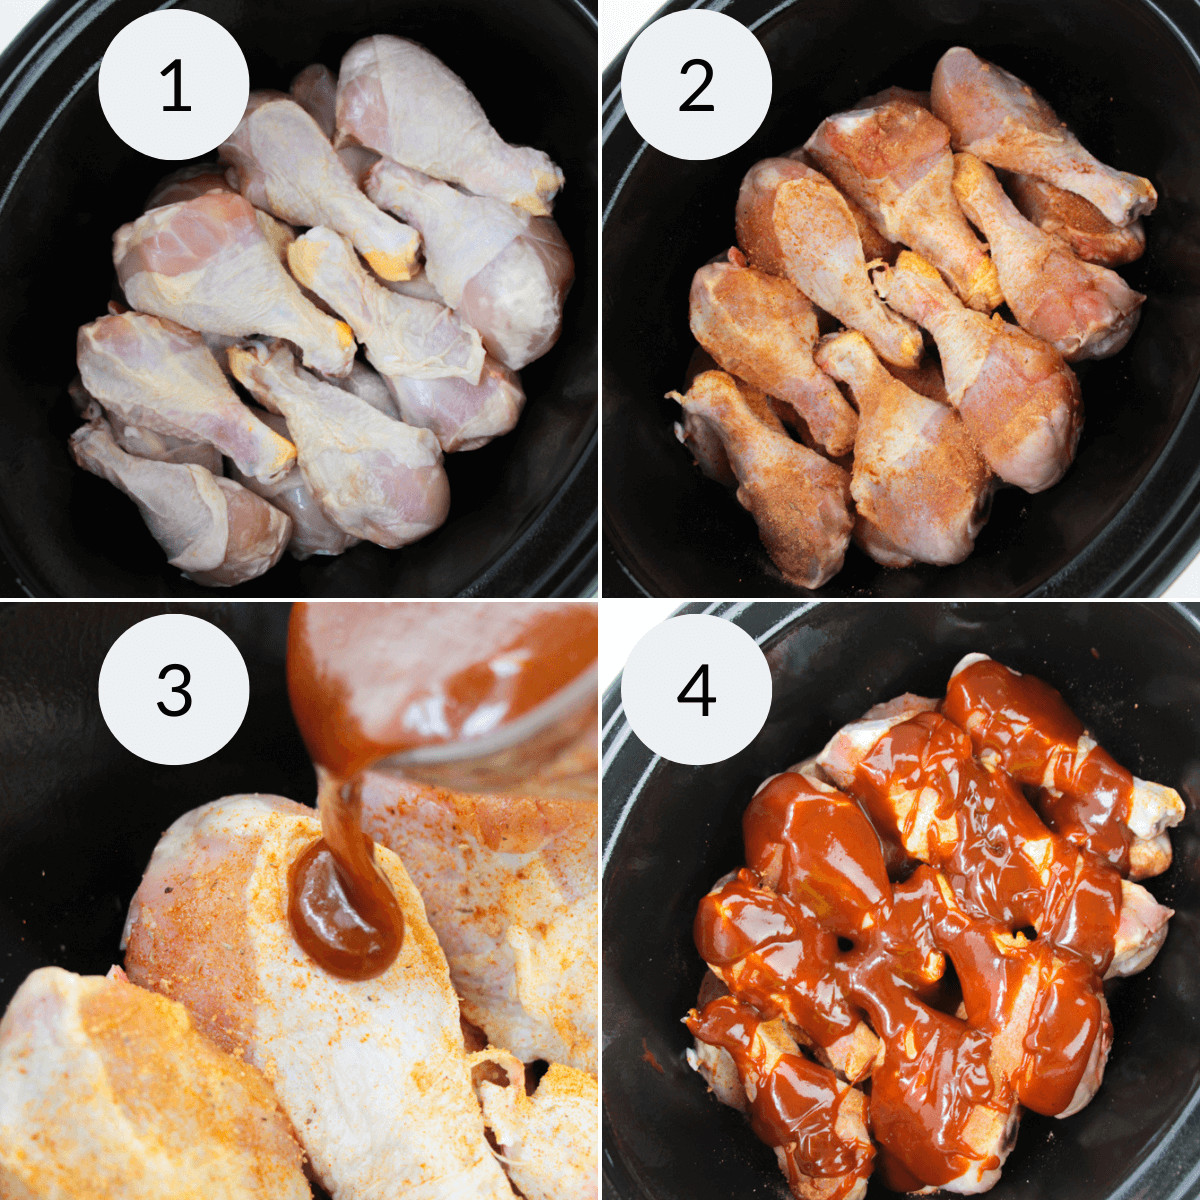 Stacking the drumsticks in the slow cooker and applying the sauce.